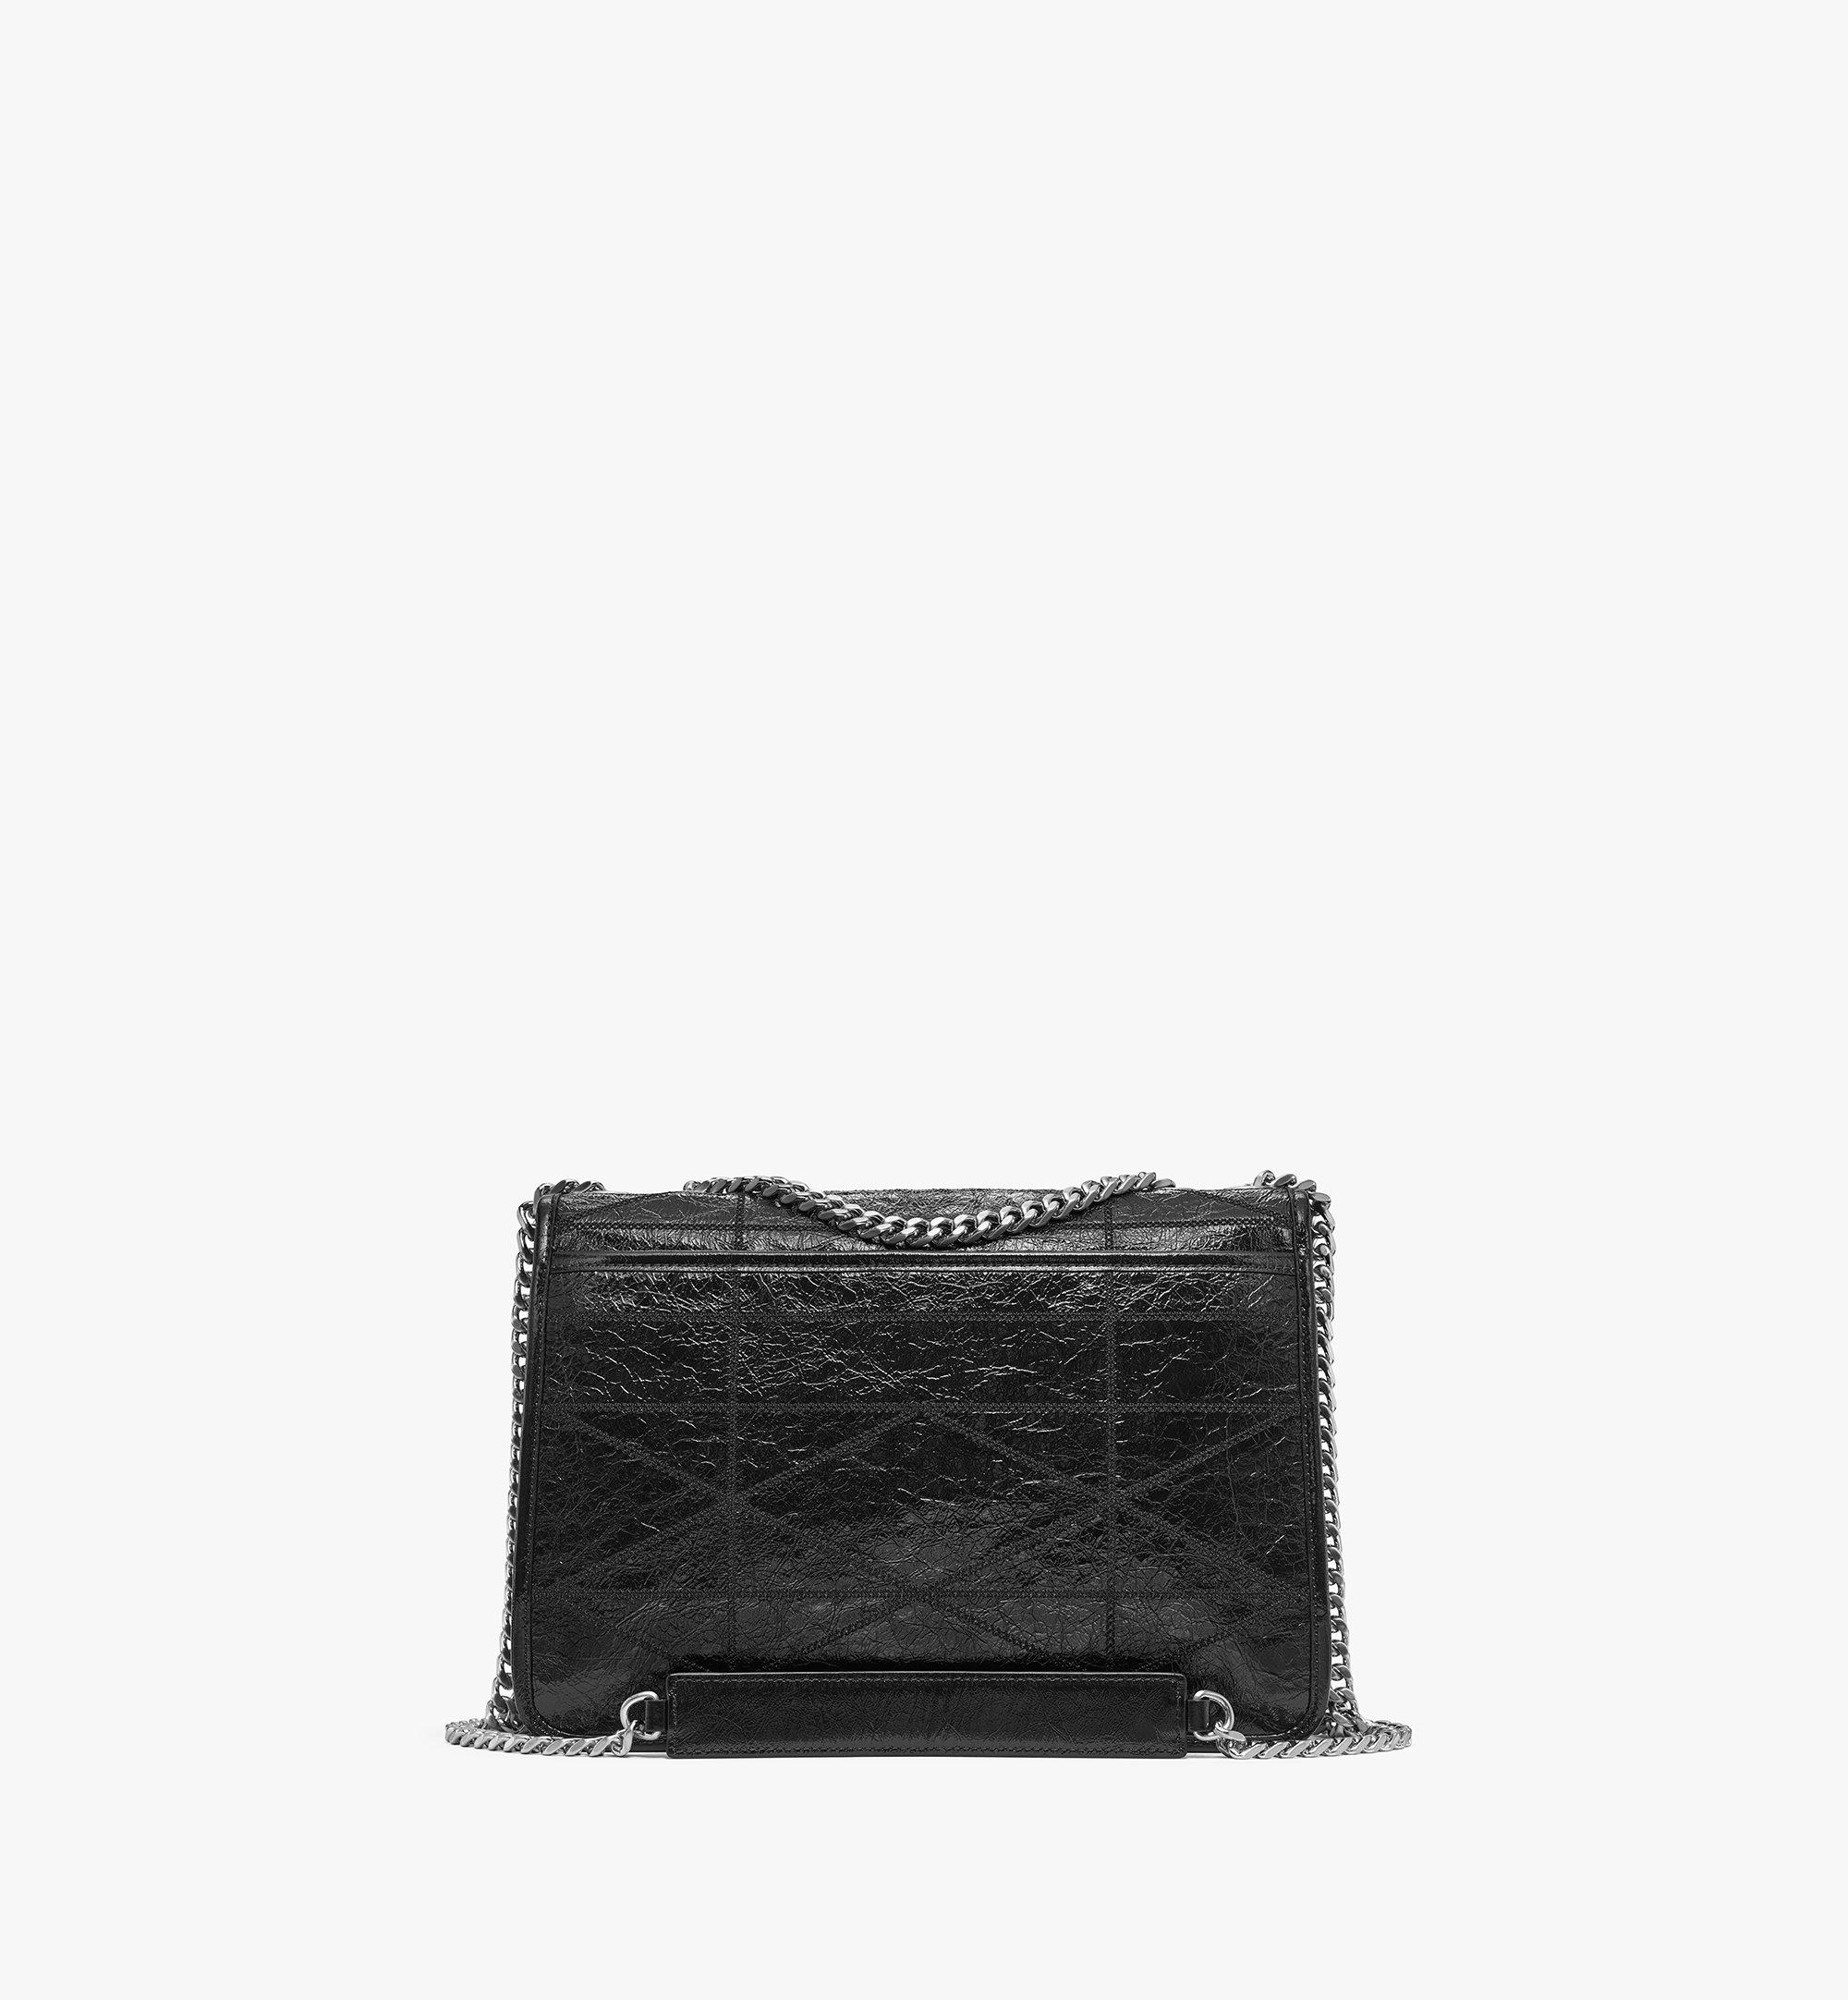 MCM Travia Quilted Shoulder Bag in Crushed Leather Black MWSBSLM05BK001 Alternate View 3